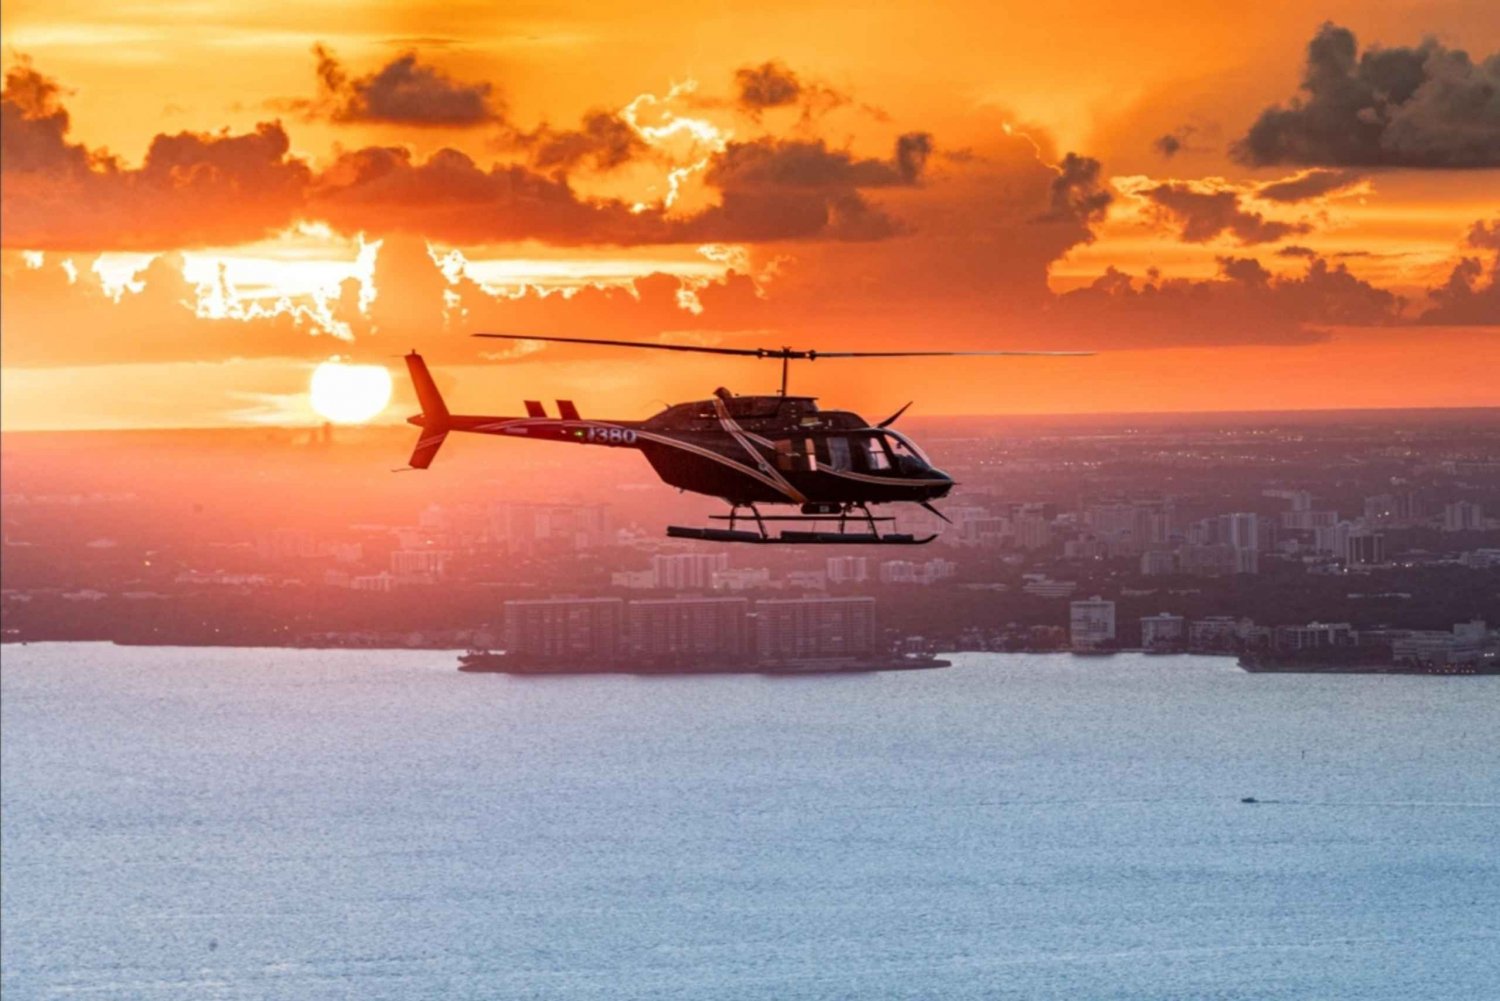 From Pembroke Pines: Helicopter Tour Over Miami